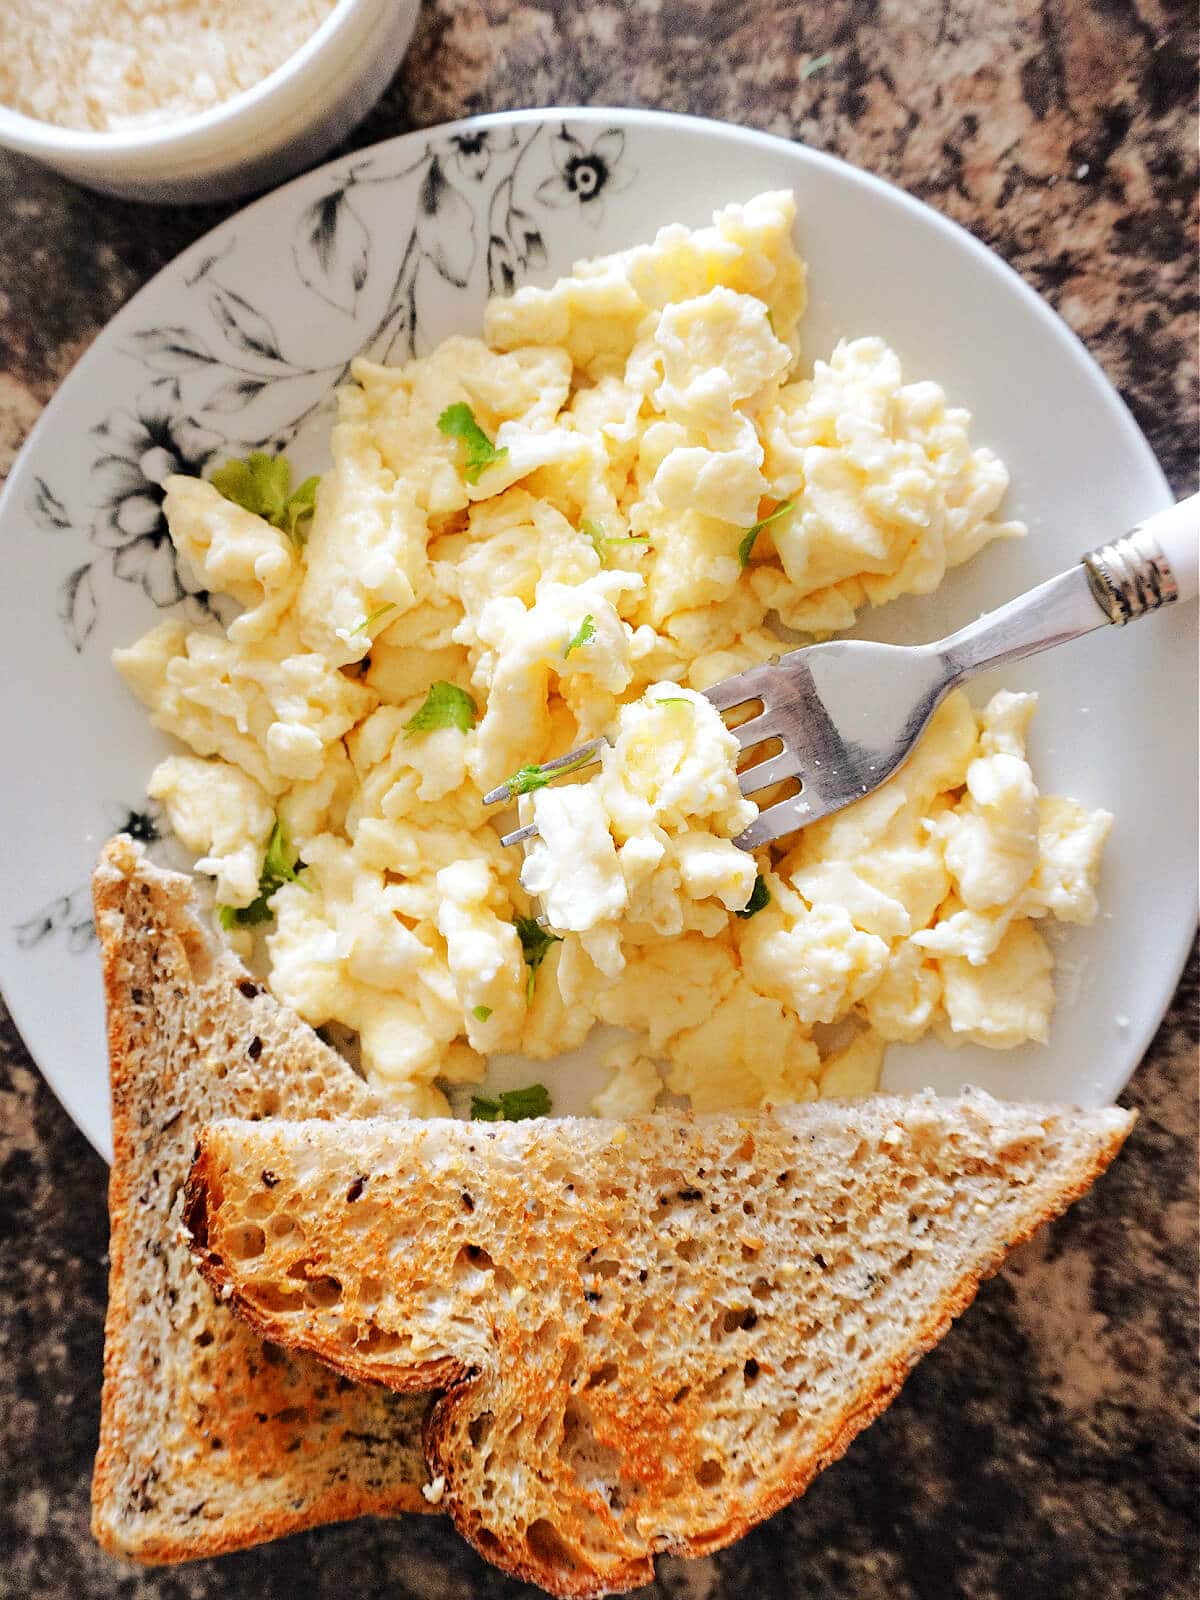 Overhead shot of a plate with scrambled eggs and 2 slices of toast.